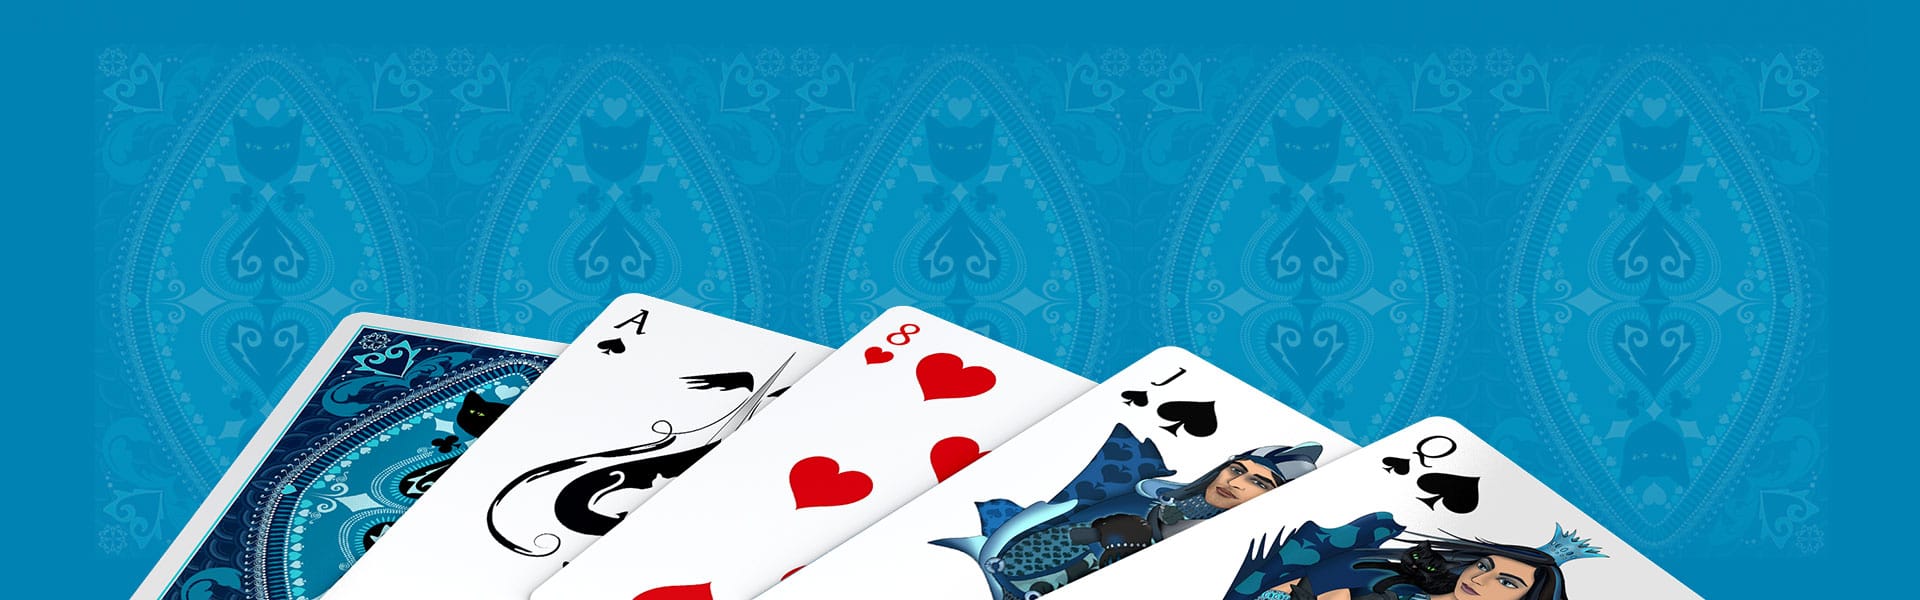 background image featuring playing cards fanned on light blue rendering of Nine Lives card back design